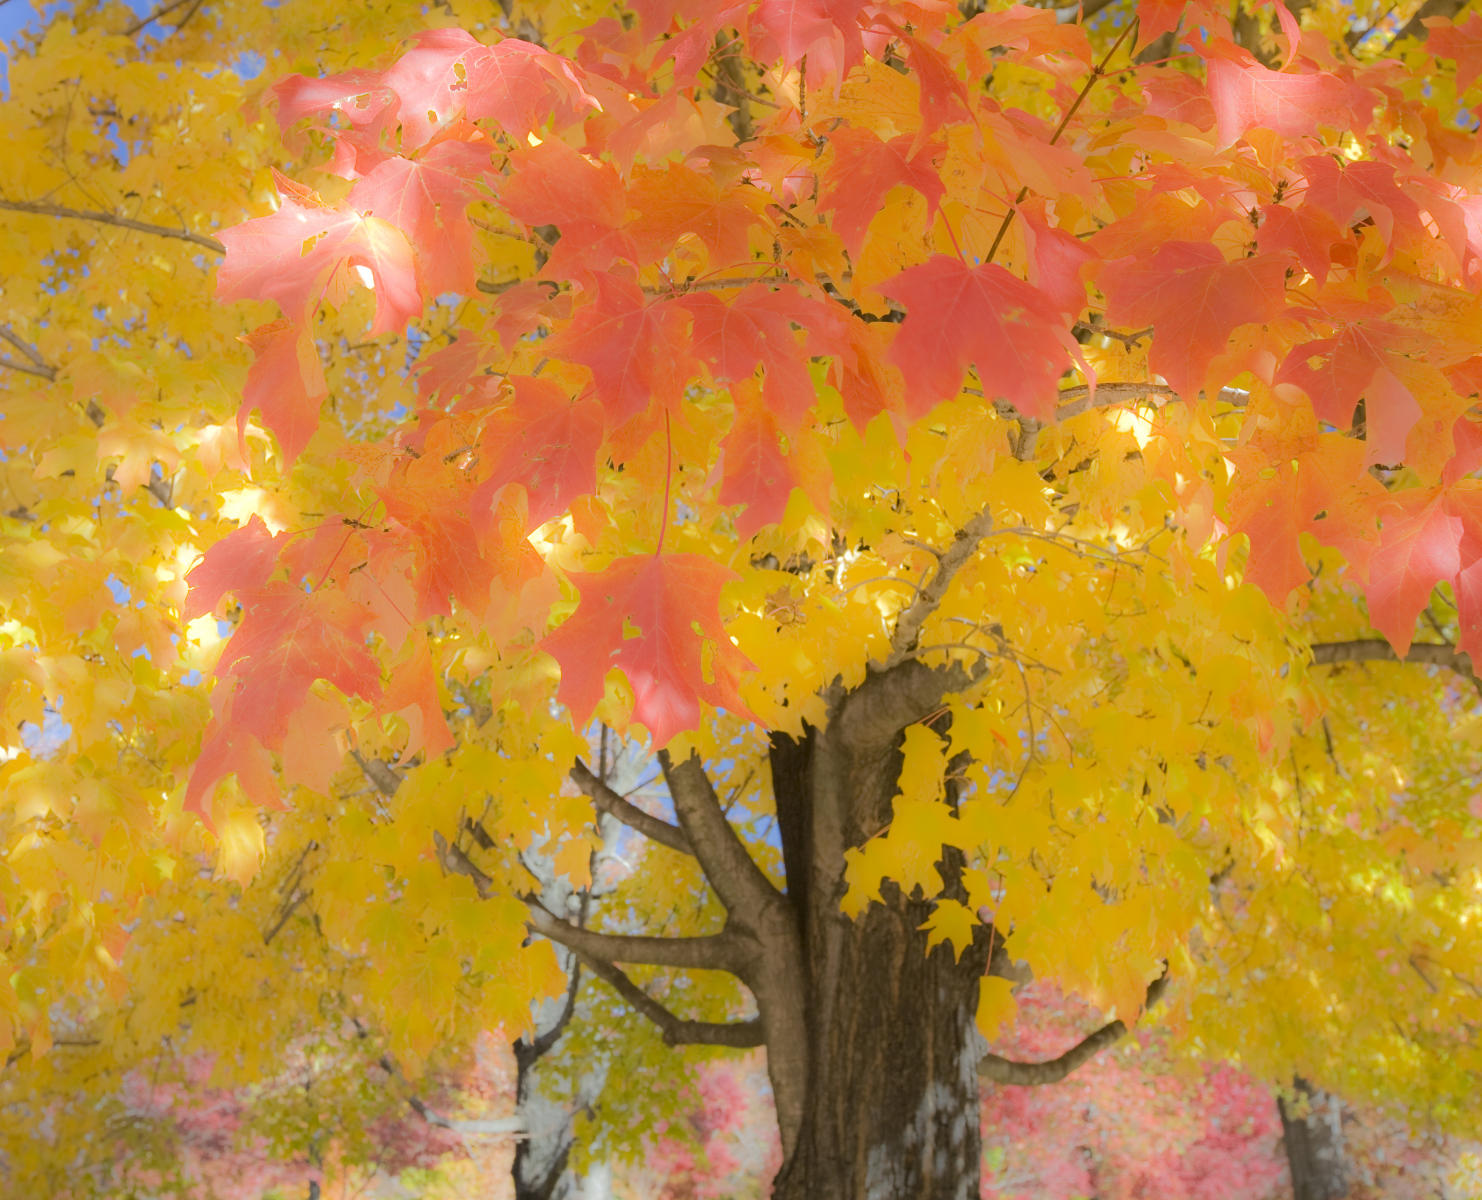 Fall Color - From the Autumn collection  : Sample Series Images : Bruno Mahlmann Photography - Washington, DC Photographer